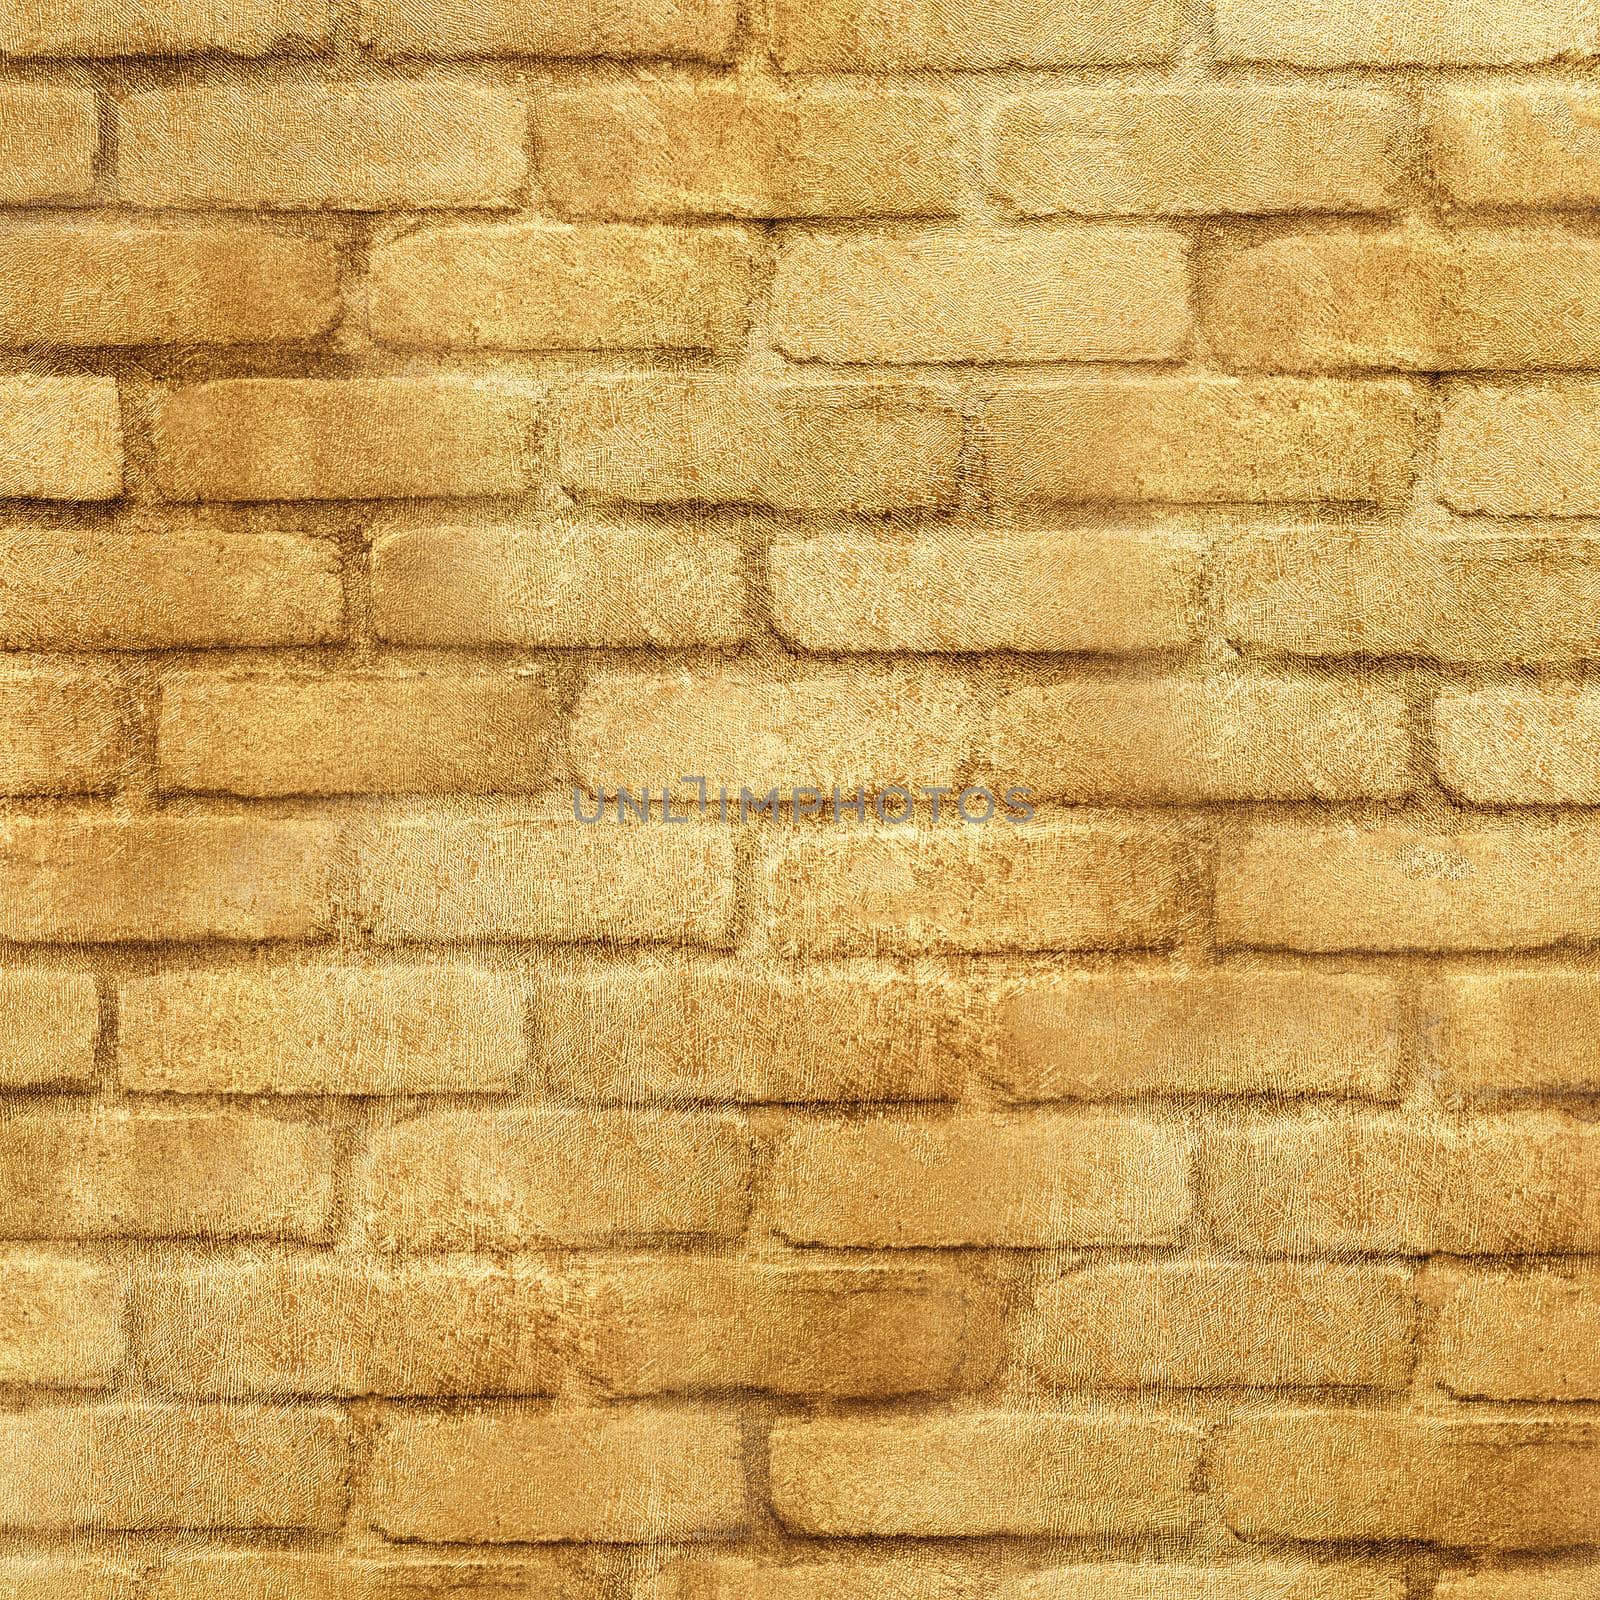 Imitation yellow gold brick wall abstract texture background.Texture or background